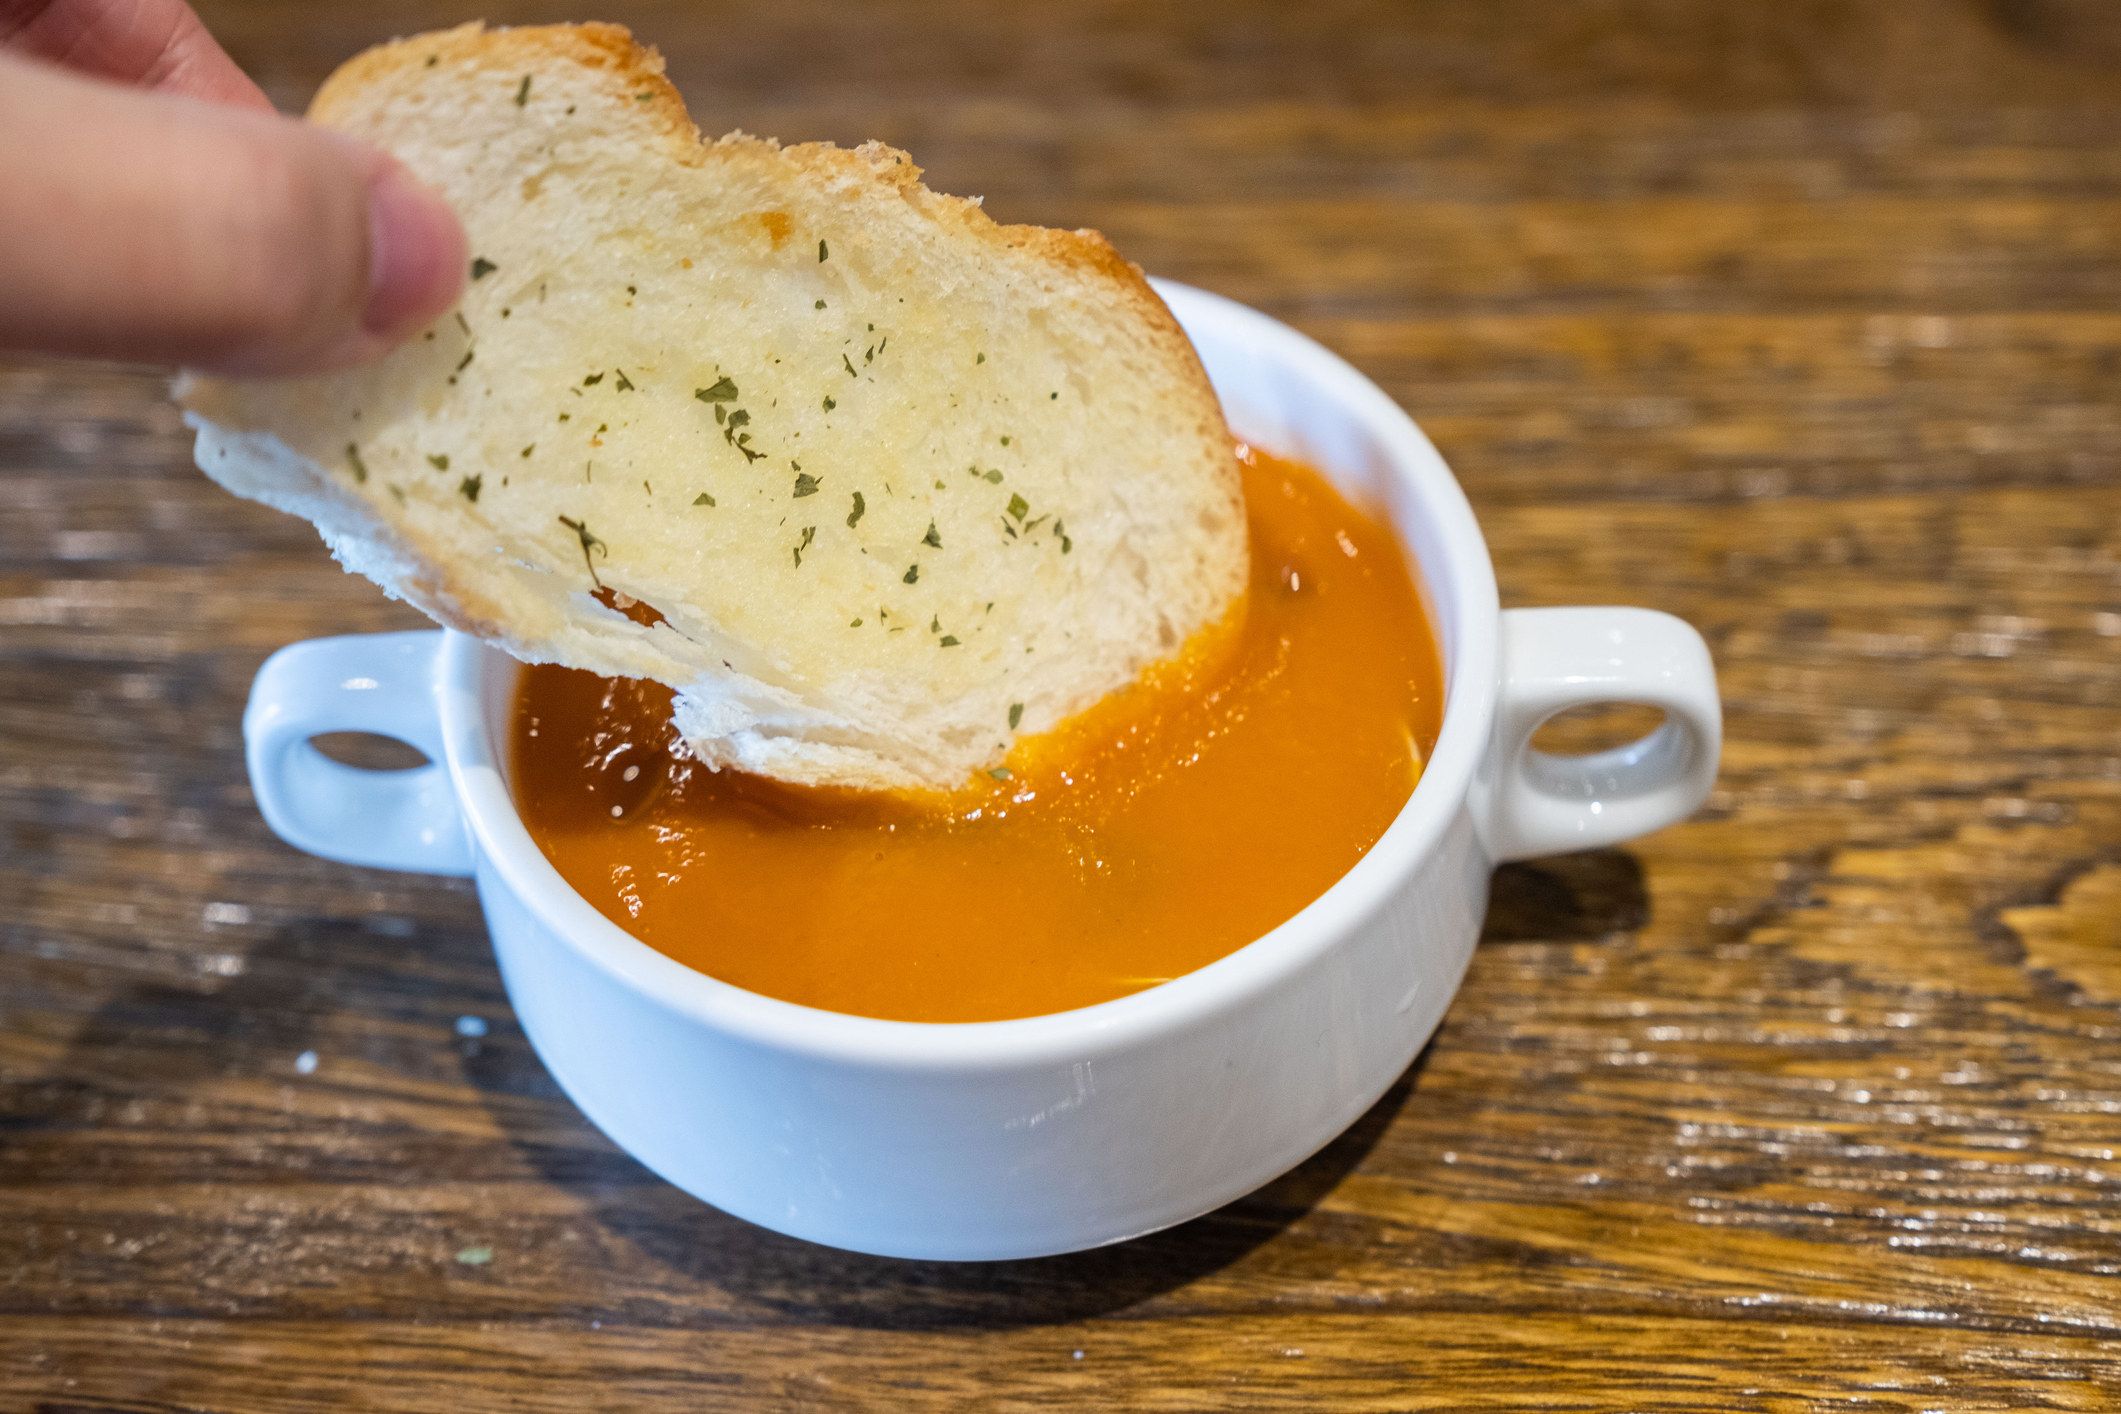 Roasted tomato soup with a slice of bread.